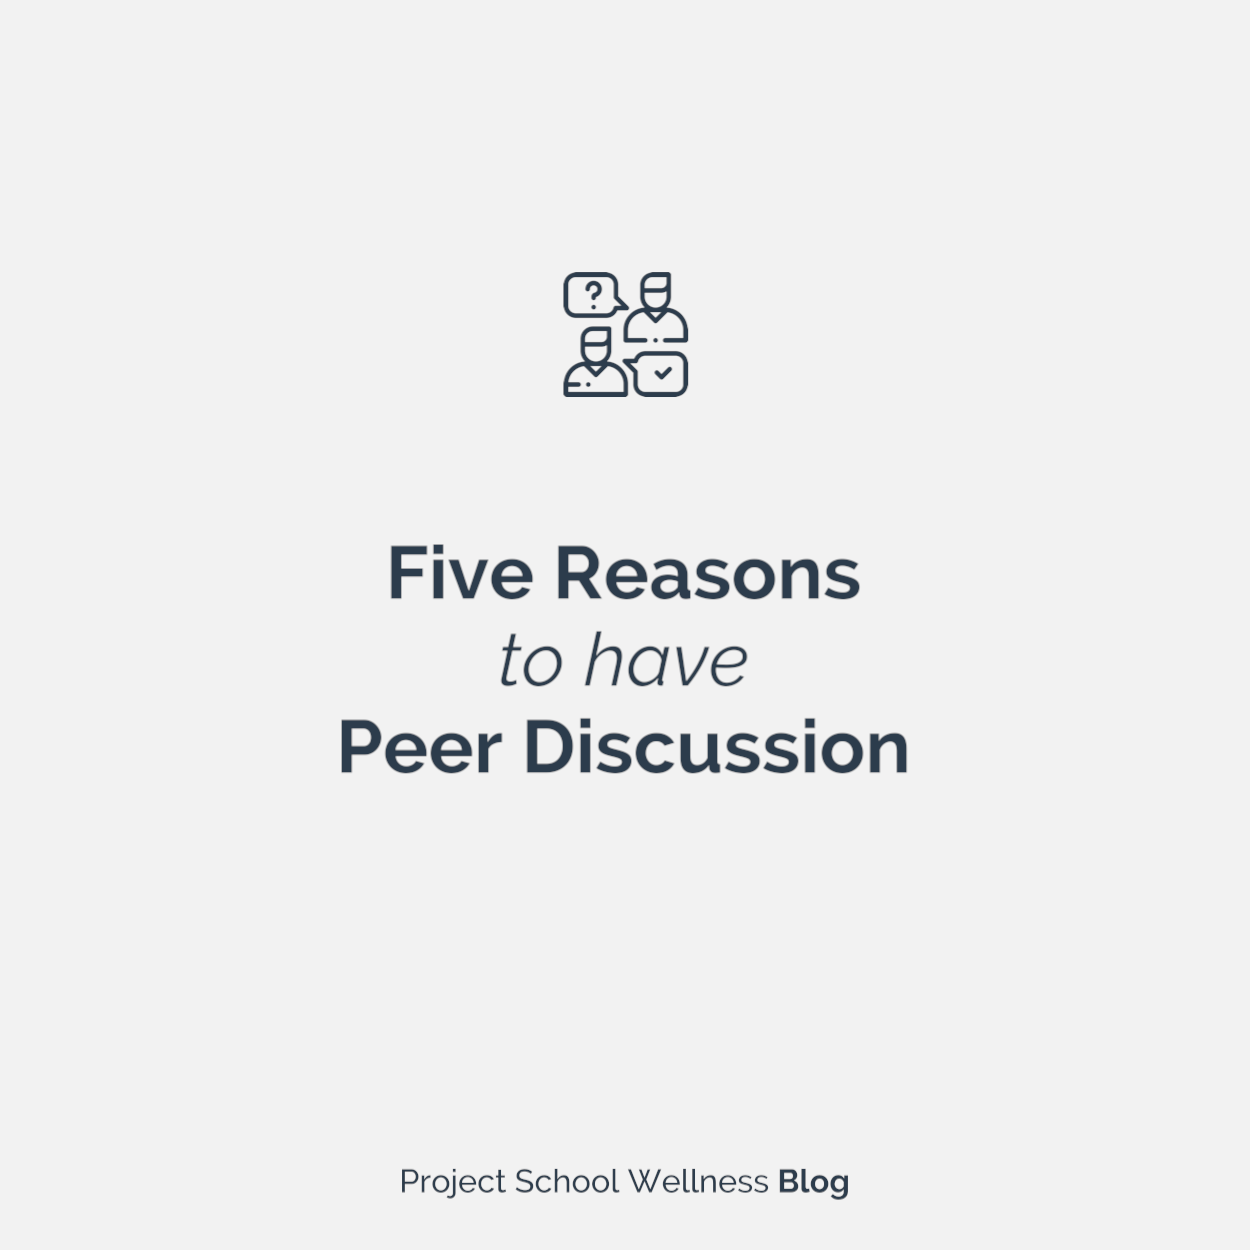 PSW Blog - Five Reasons to Have Peer Discussion